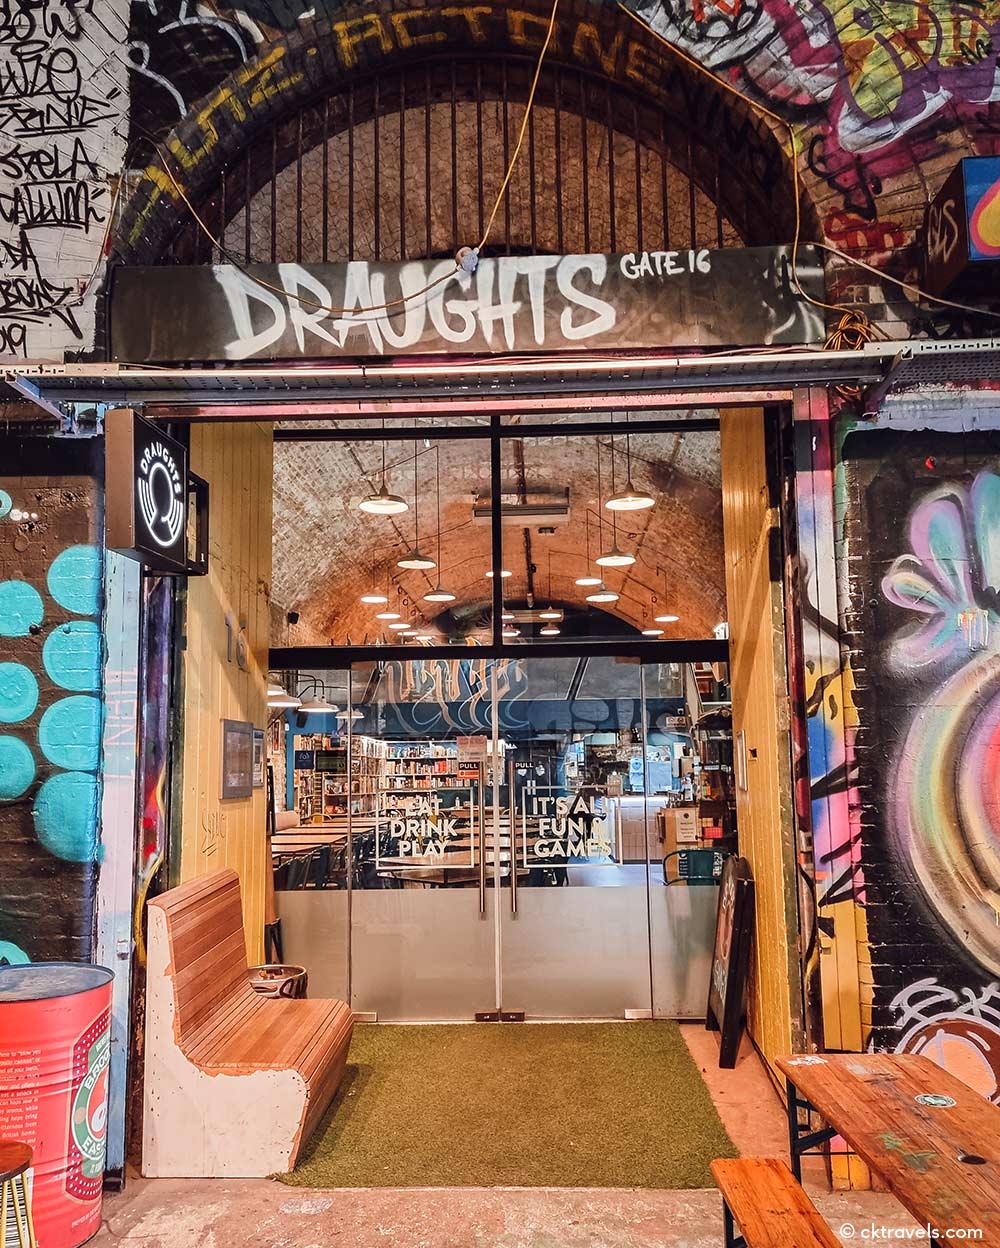 Draughts board game cafe near Waterloo Station London